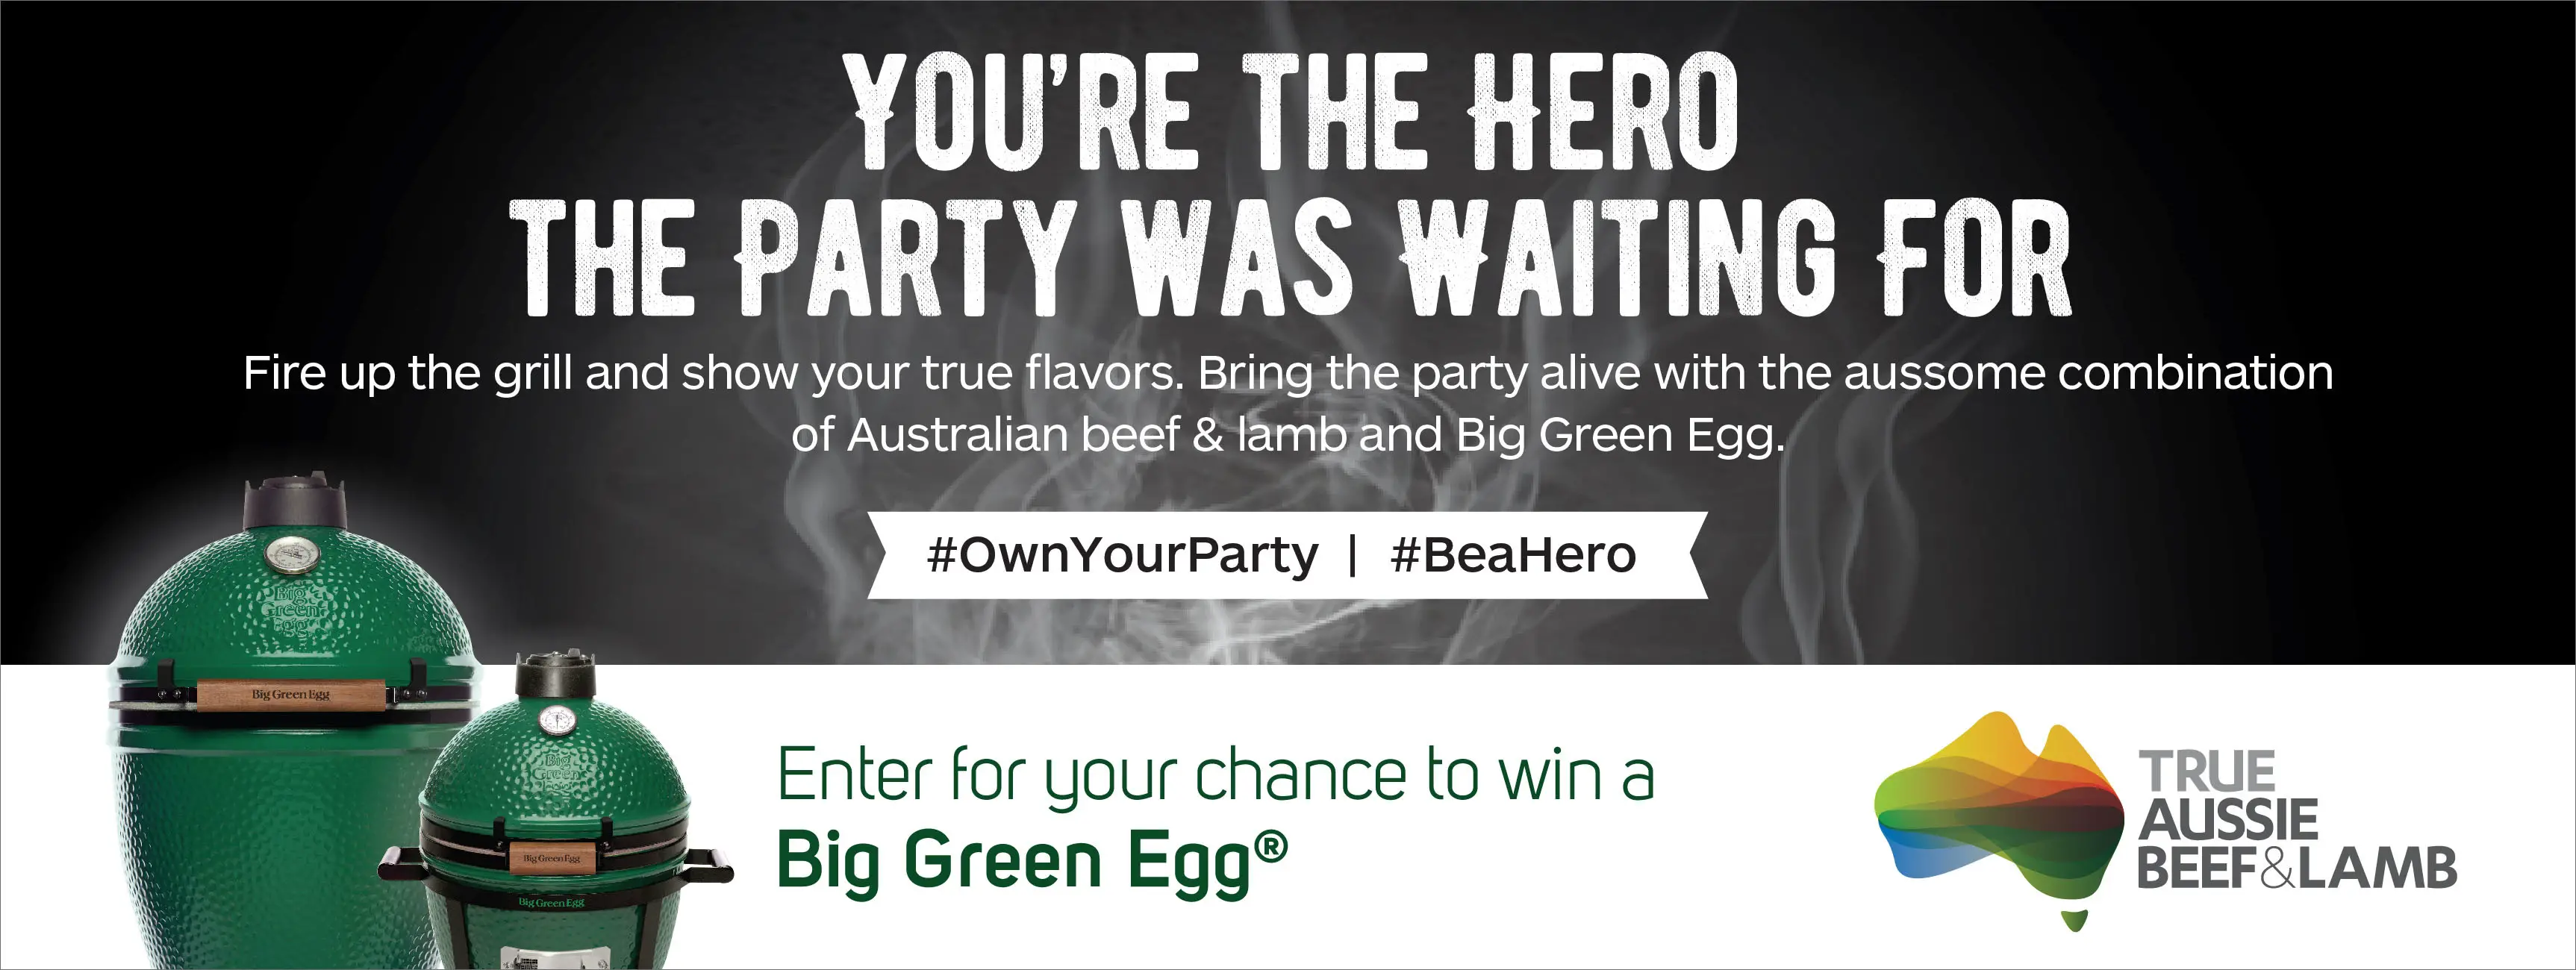 Here's your chance to win a Big Green Egg Grill and $500 in accessories